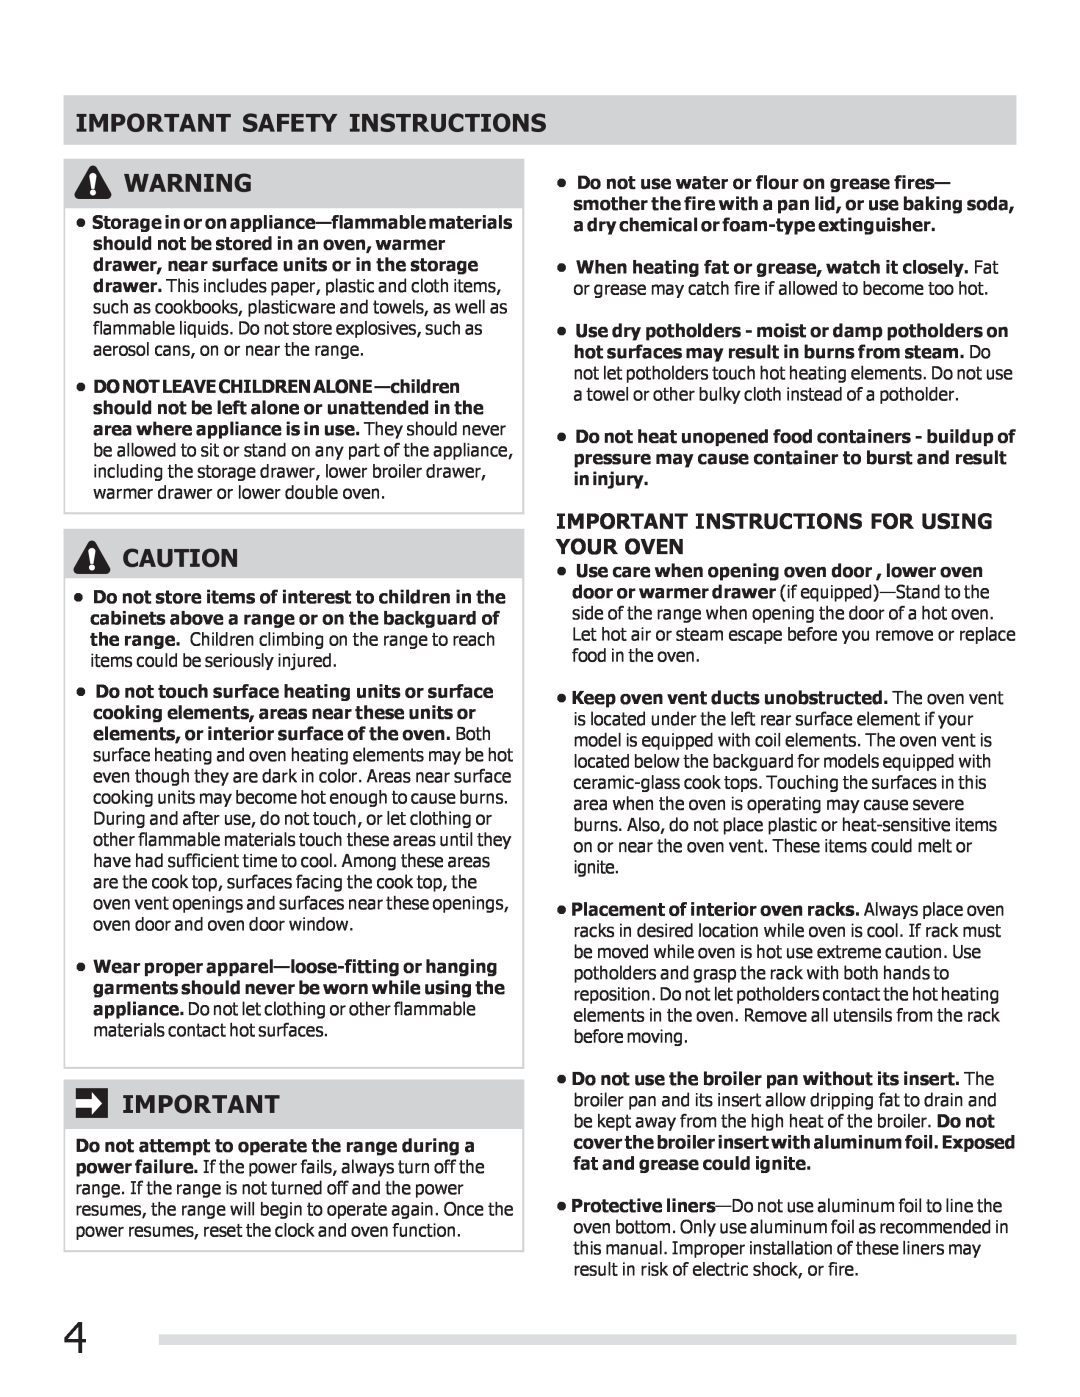 Frigidaire FFEF3017LW, FFEF3017LB, FFEF3017LS Important Instructions For Using Your Oven, Important Safety Instructions 